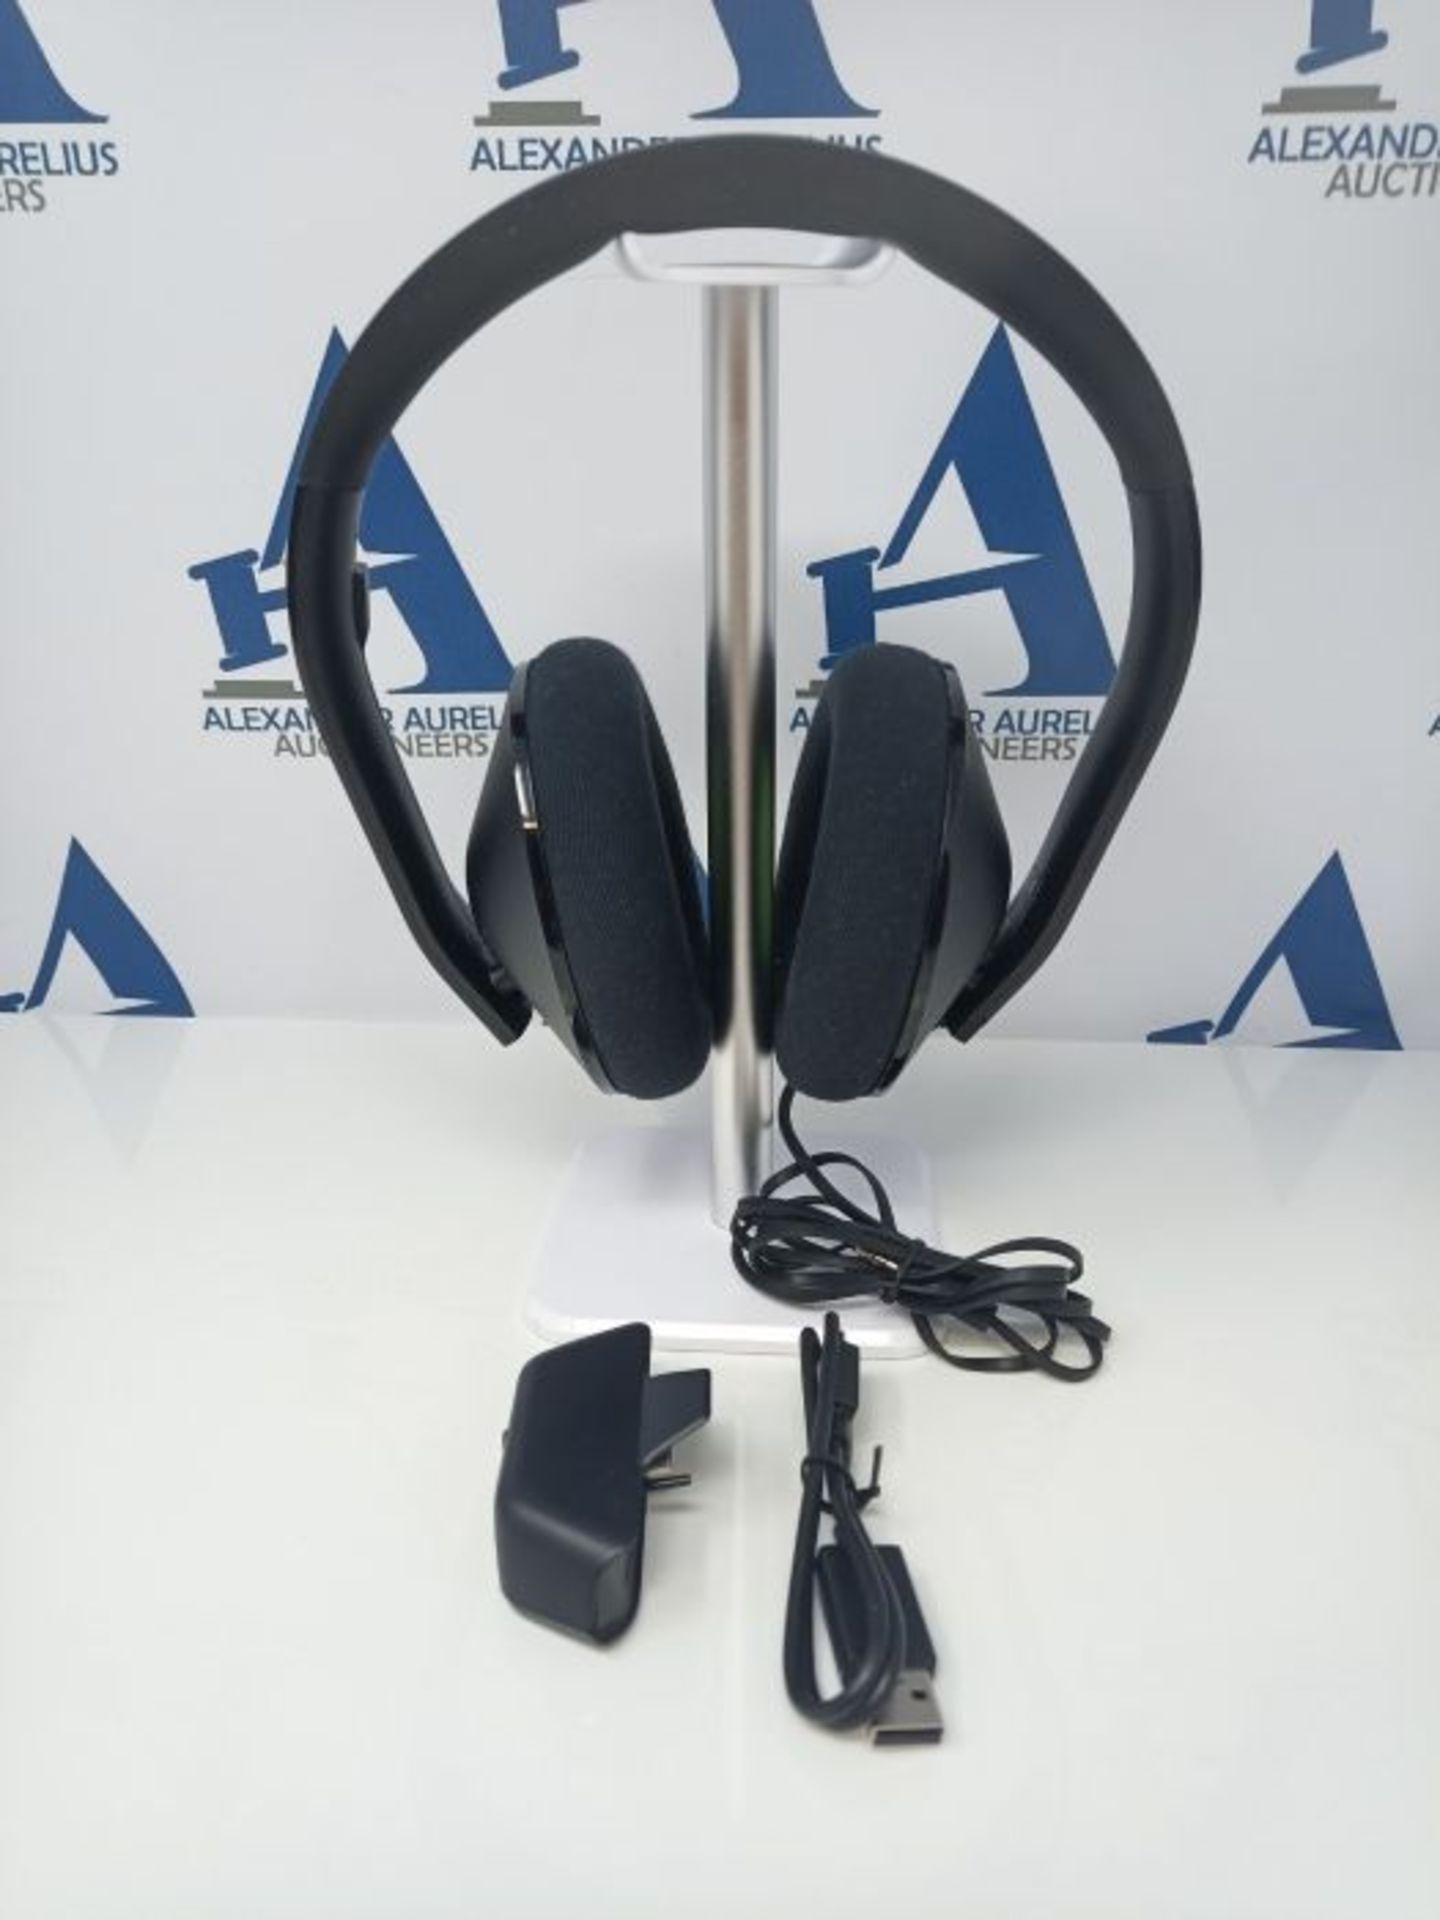 Xbox Stereo Headset - Image 3 of 3